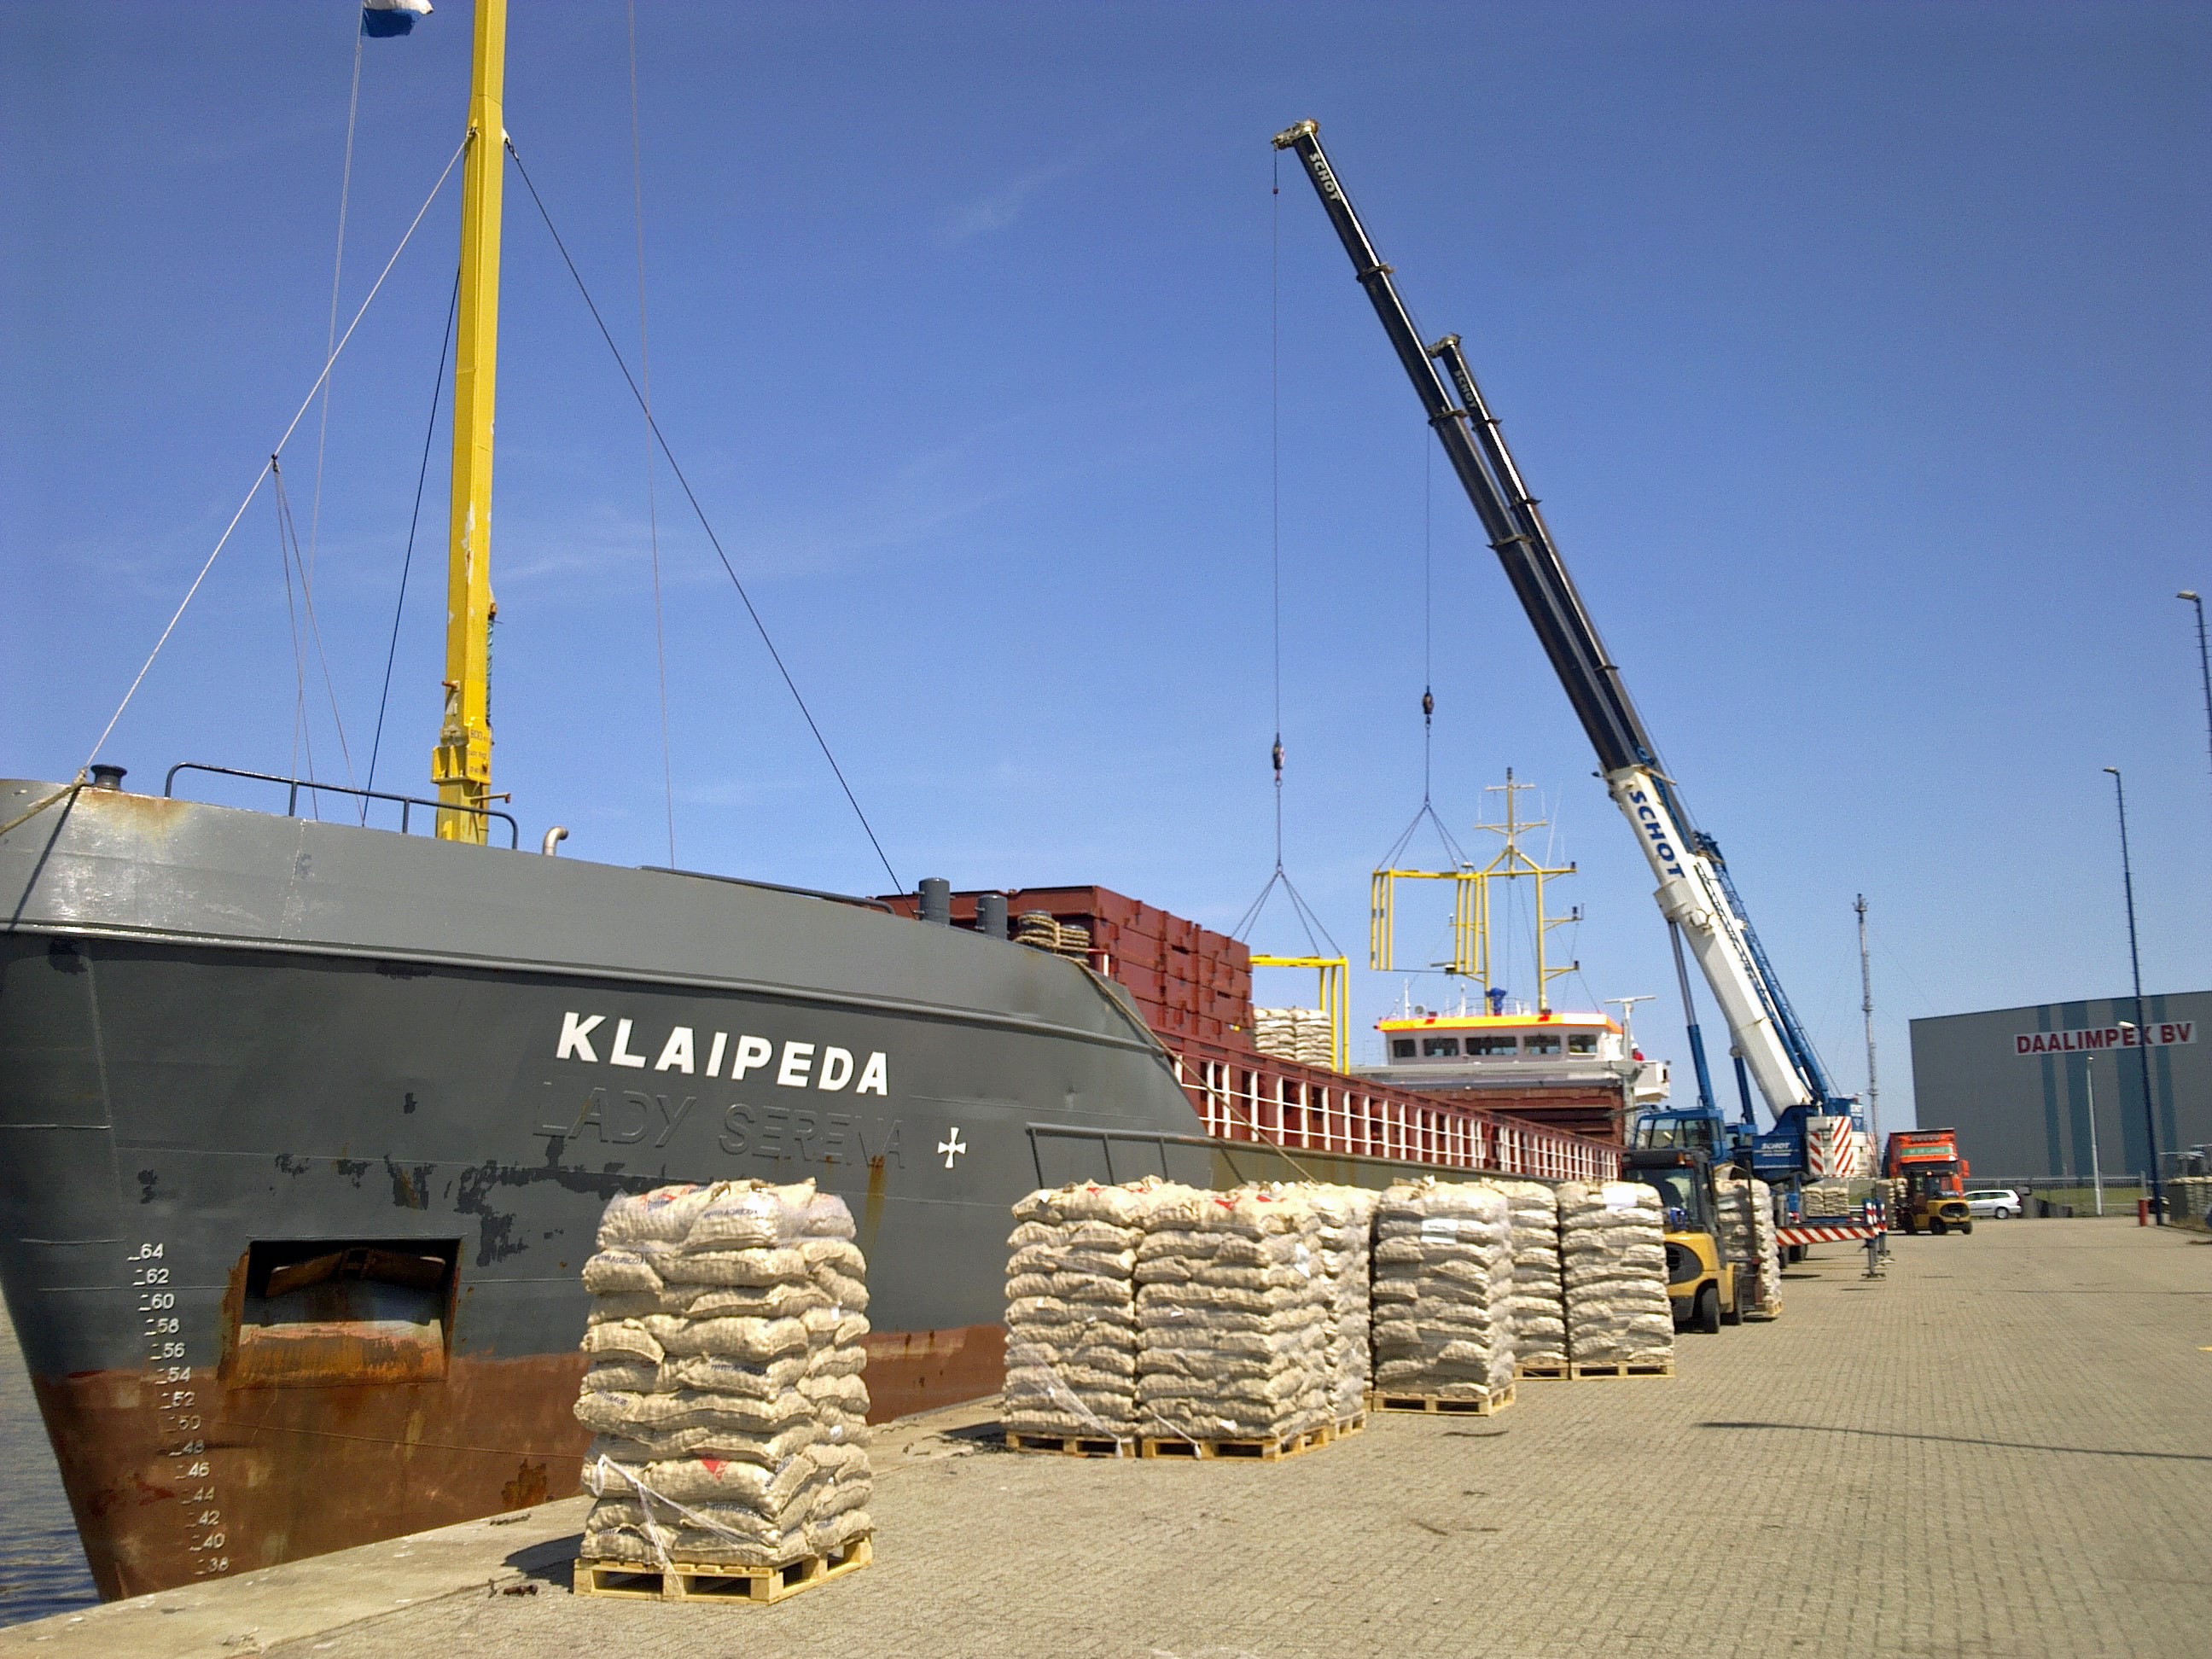 Shipment of seed potatoes at the harbor